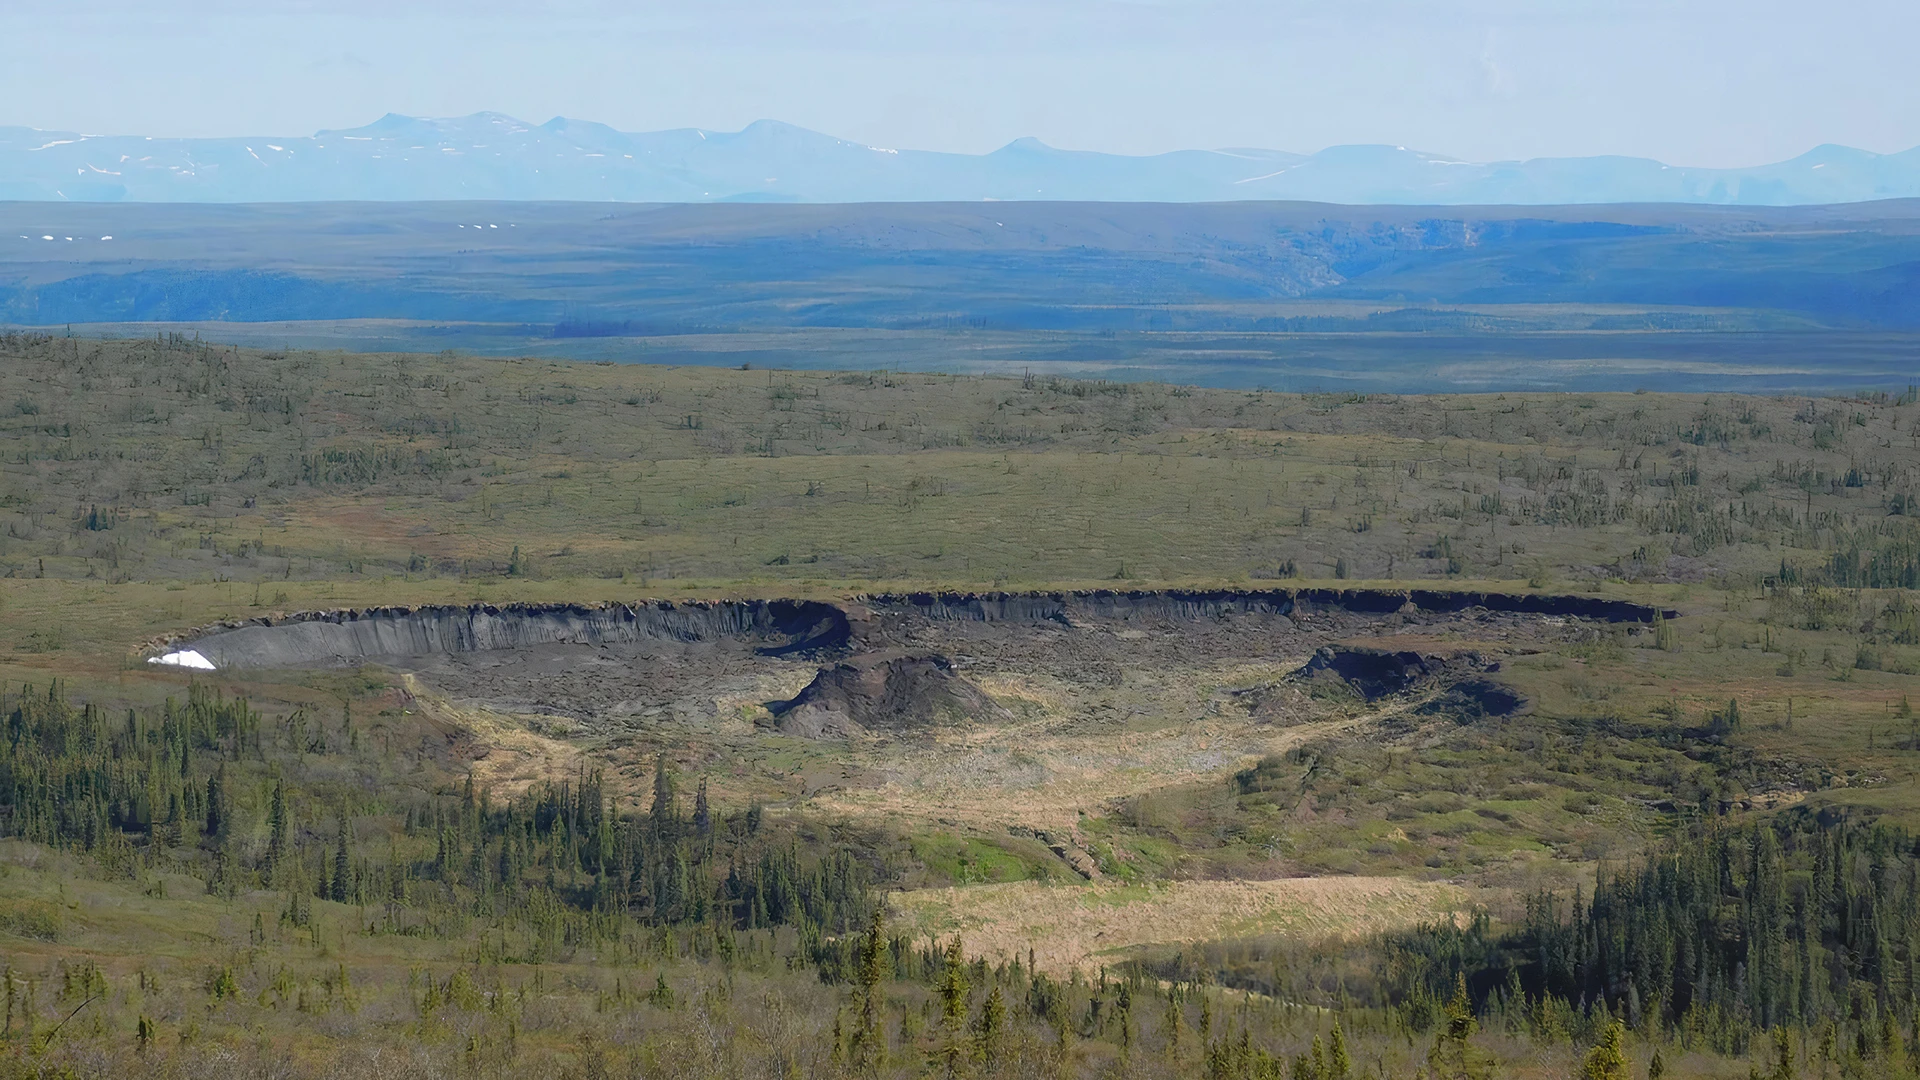 The world's permafrost is rapidly thawing and it's a big climate change problem